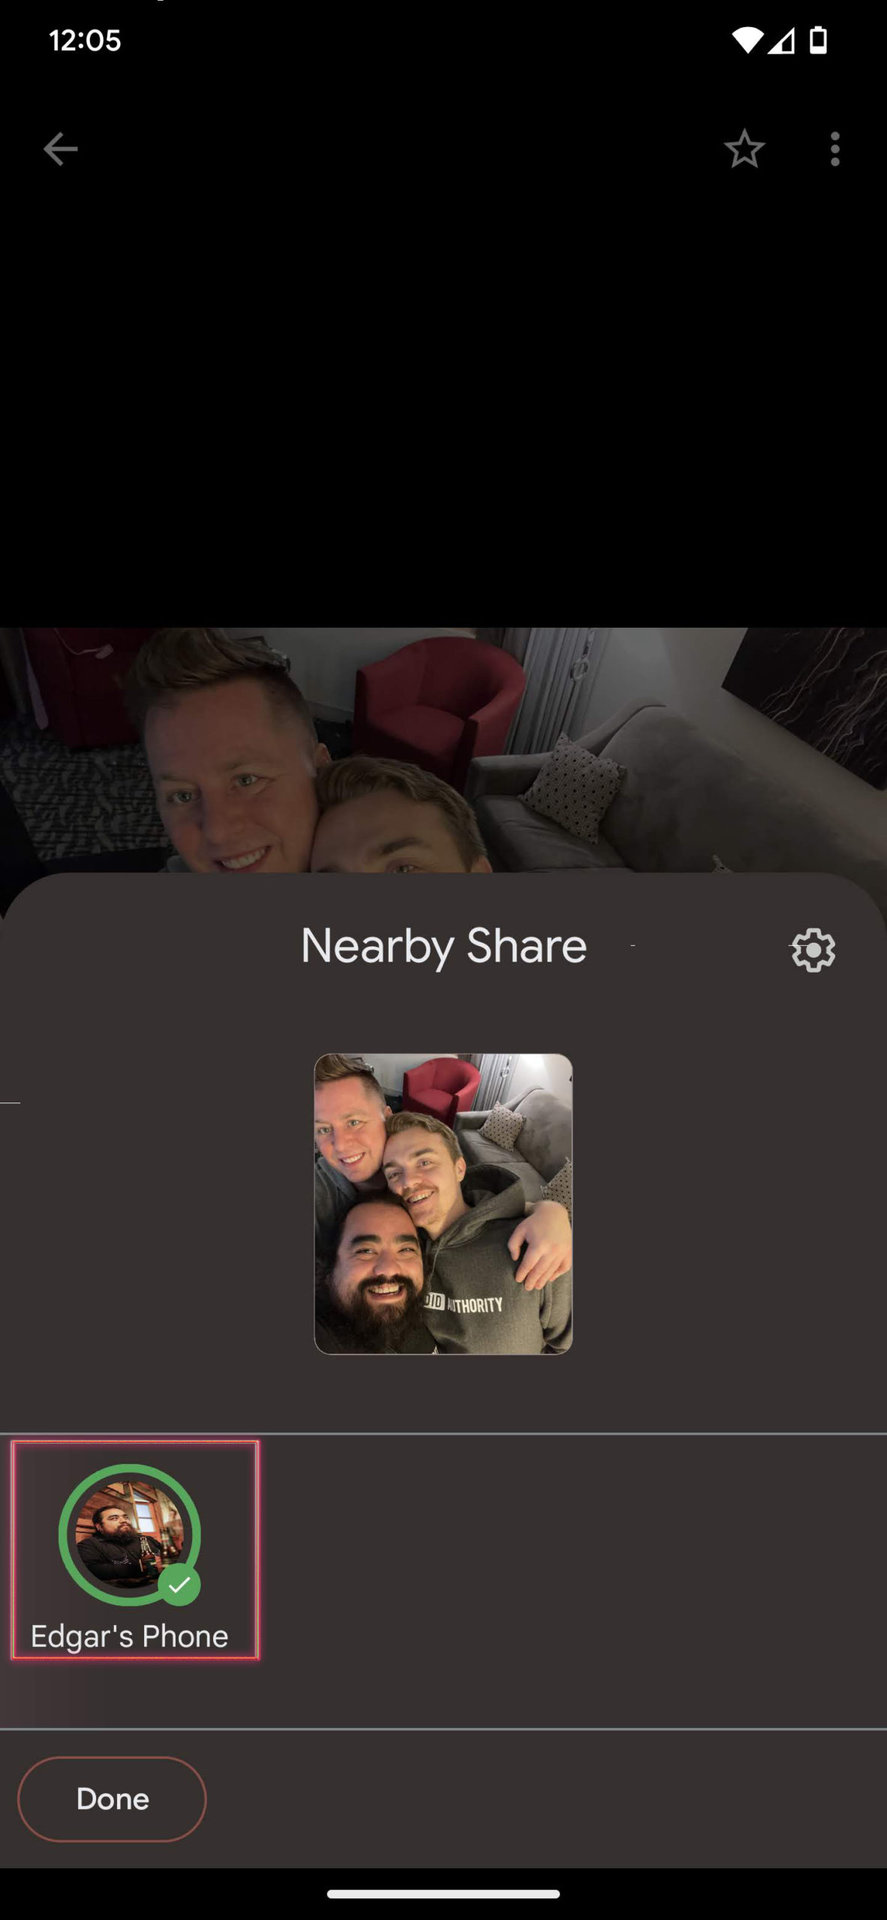 How to use Nearby Share 3